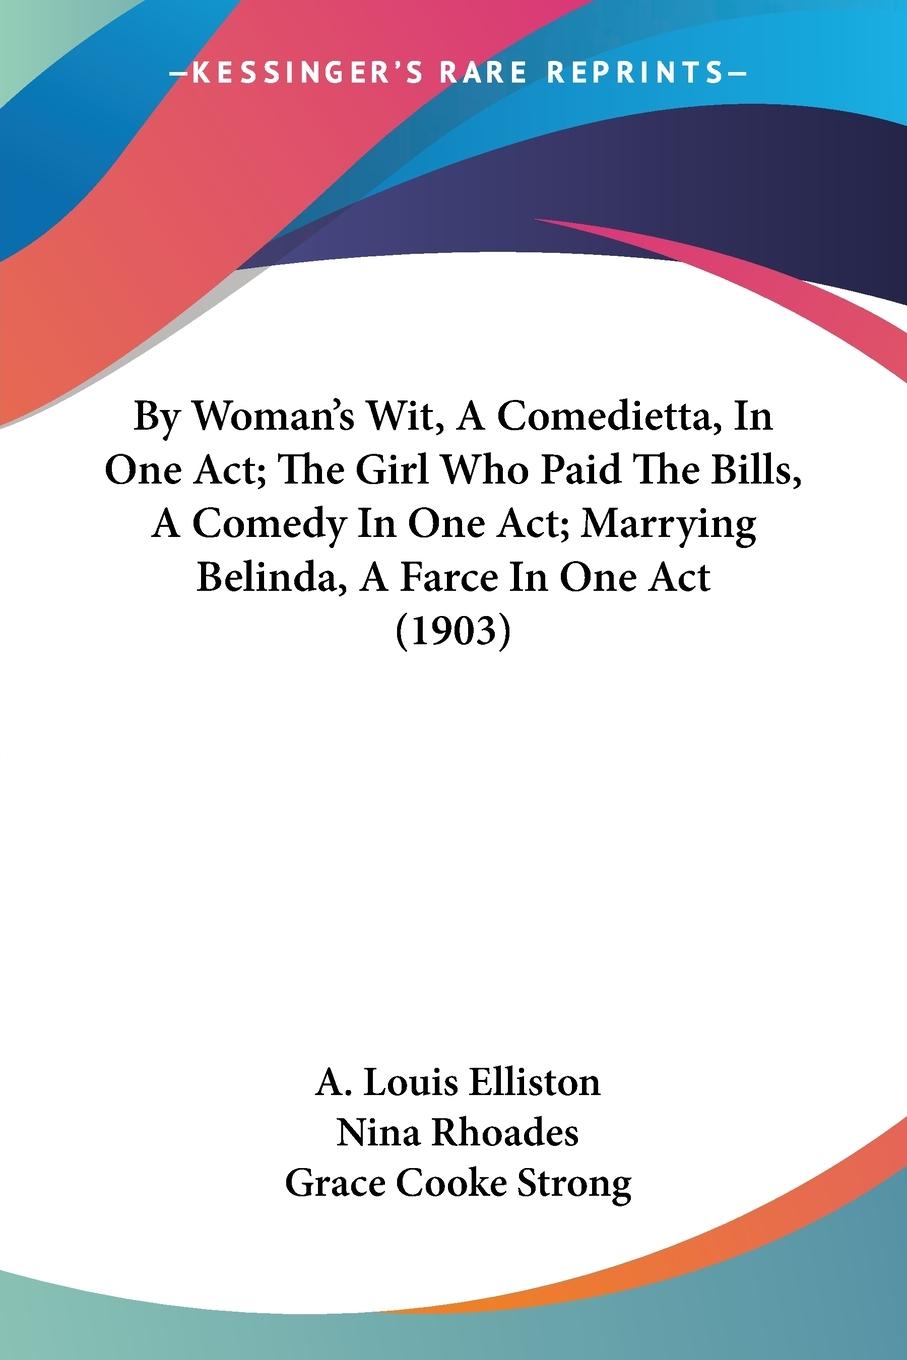 By Woman s Wit, A Comedietta, In One Act; The Girl Who Paid The Bills, A Comedy In One Act; Marrying Belinda, A Farce In One Act (1903) - Elliston, A. Louis Rhoades, Nina Strong, Grace Cooke